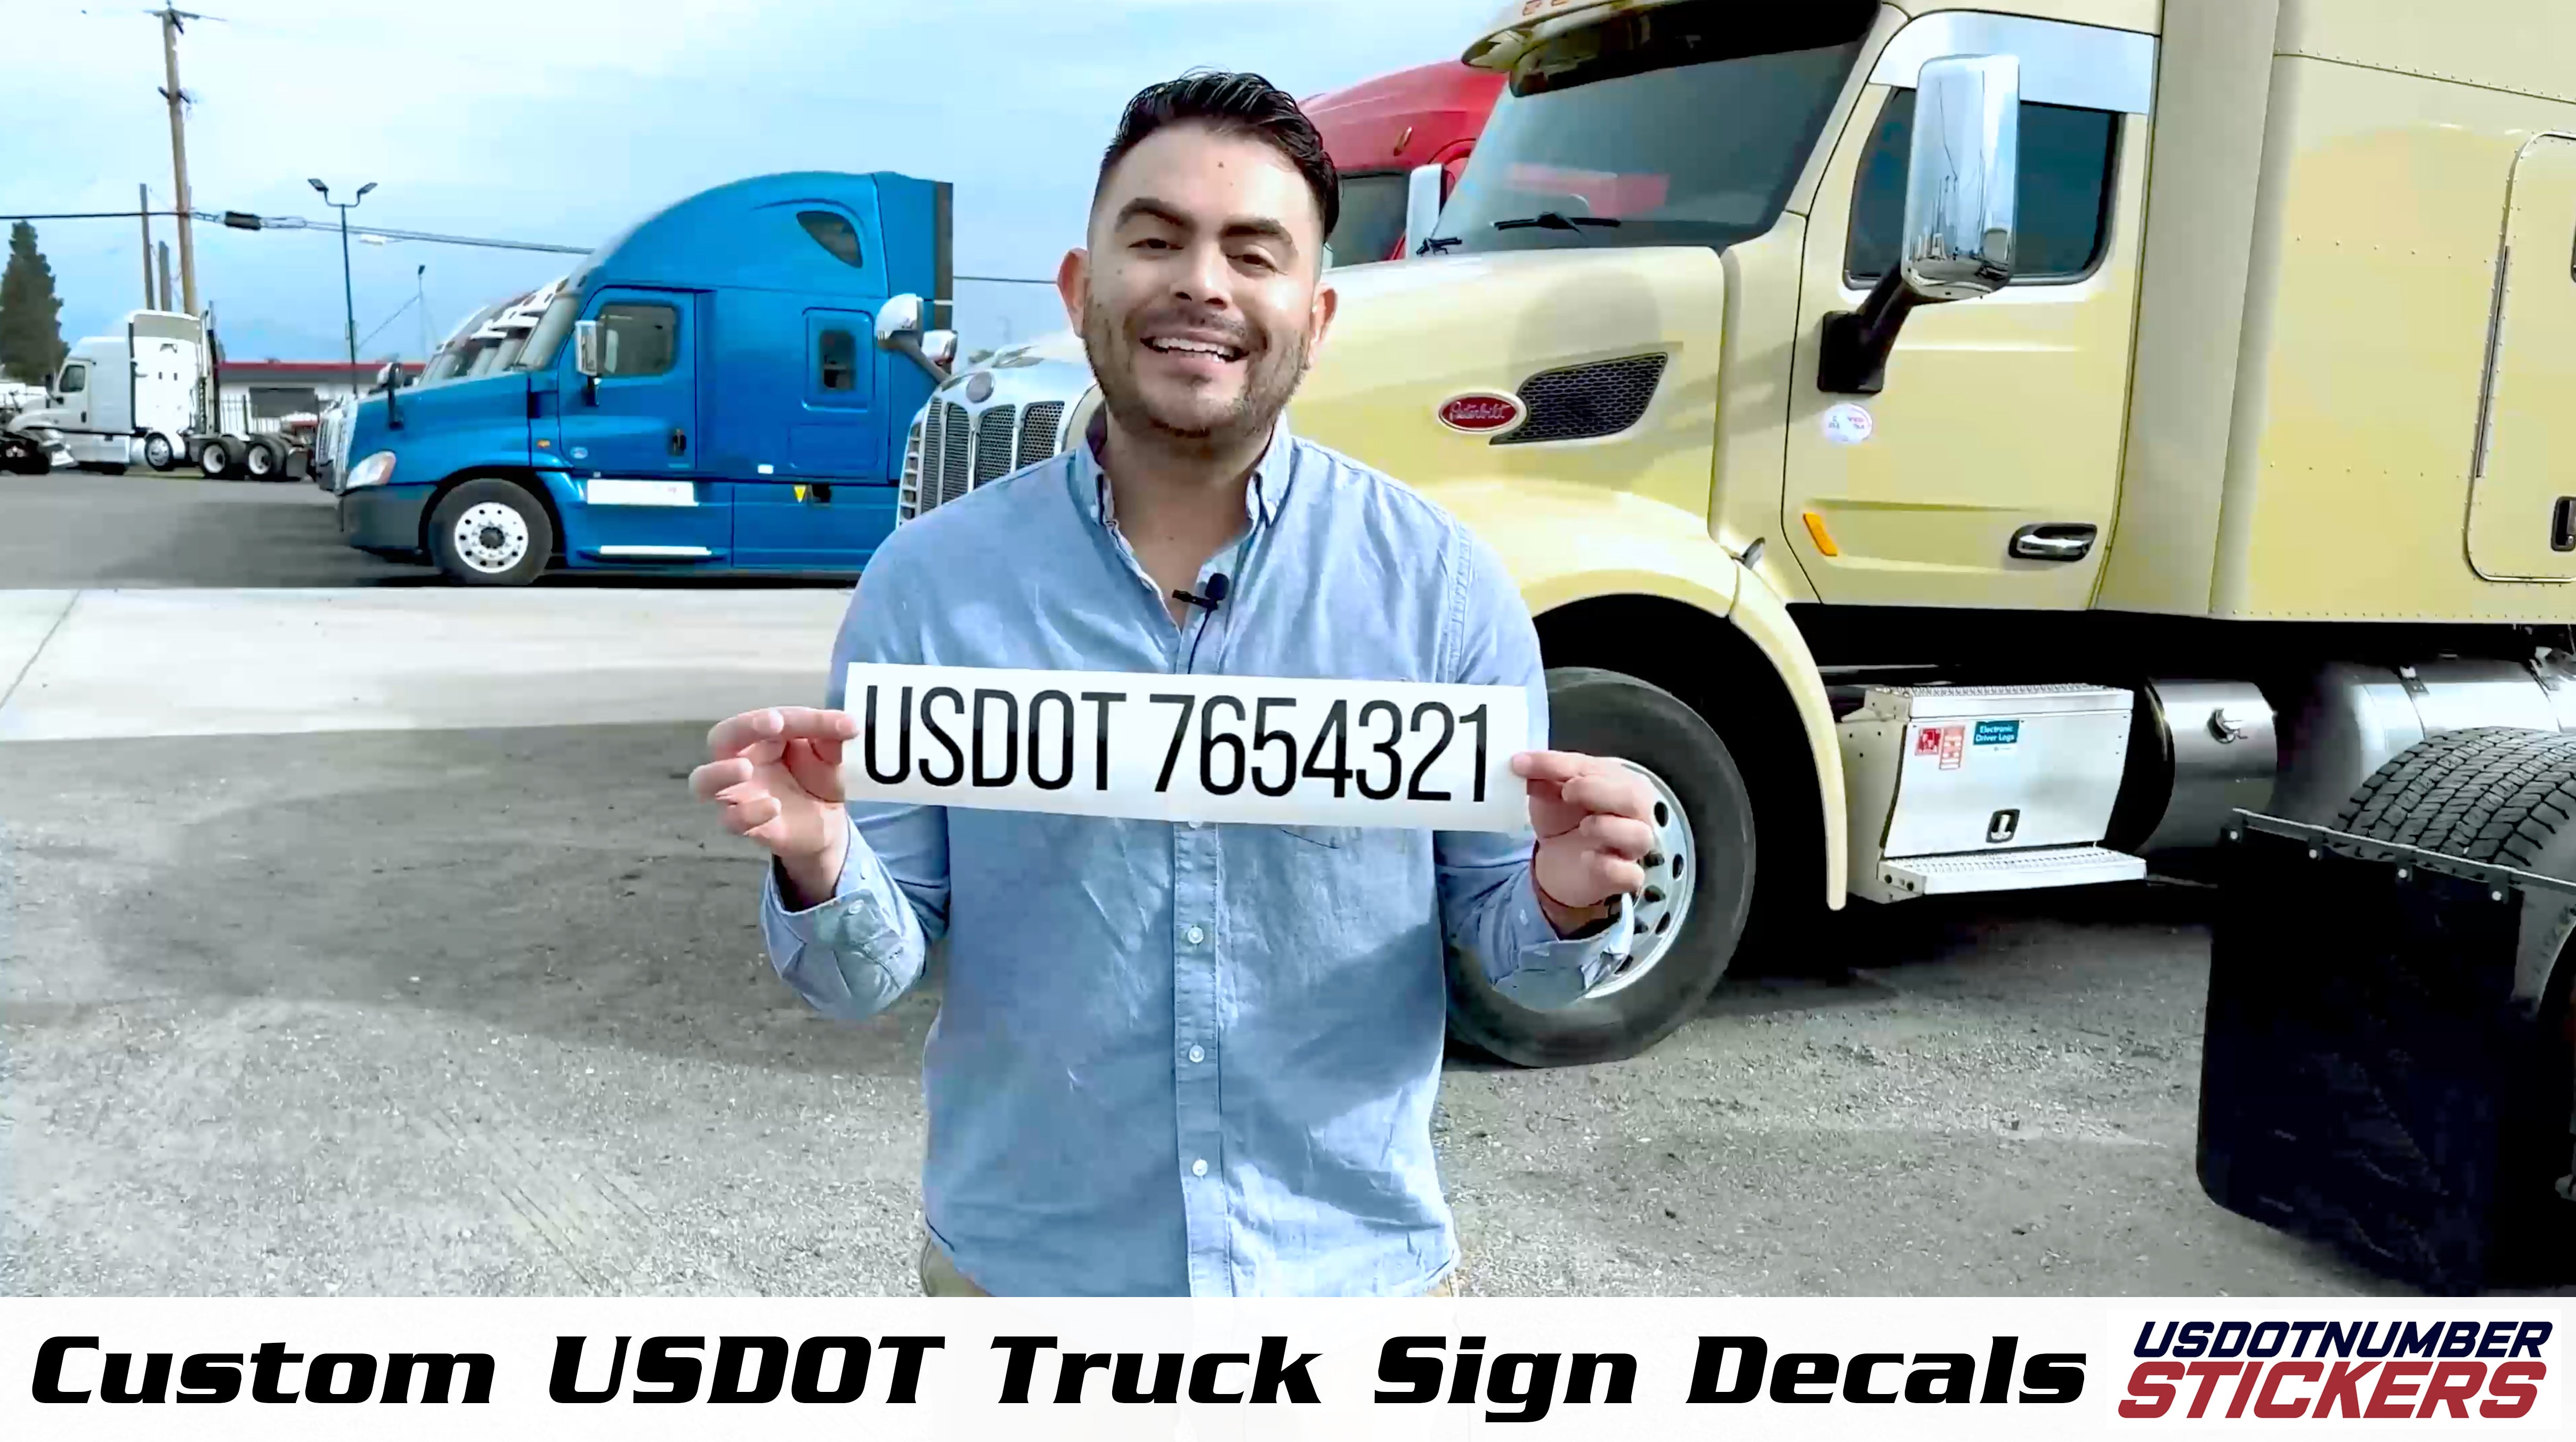 man holding usdot number decal sticker